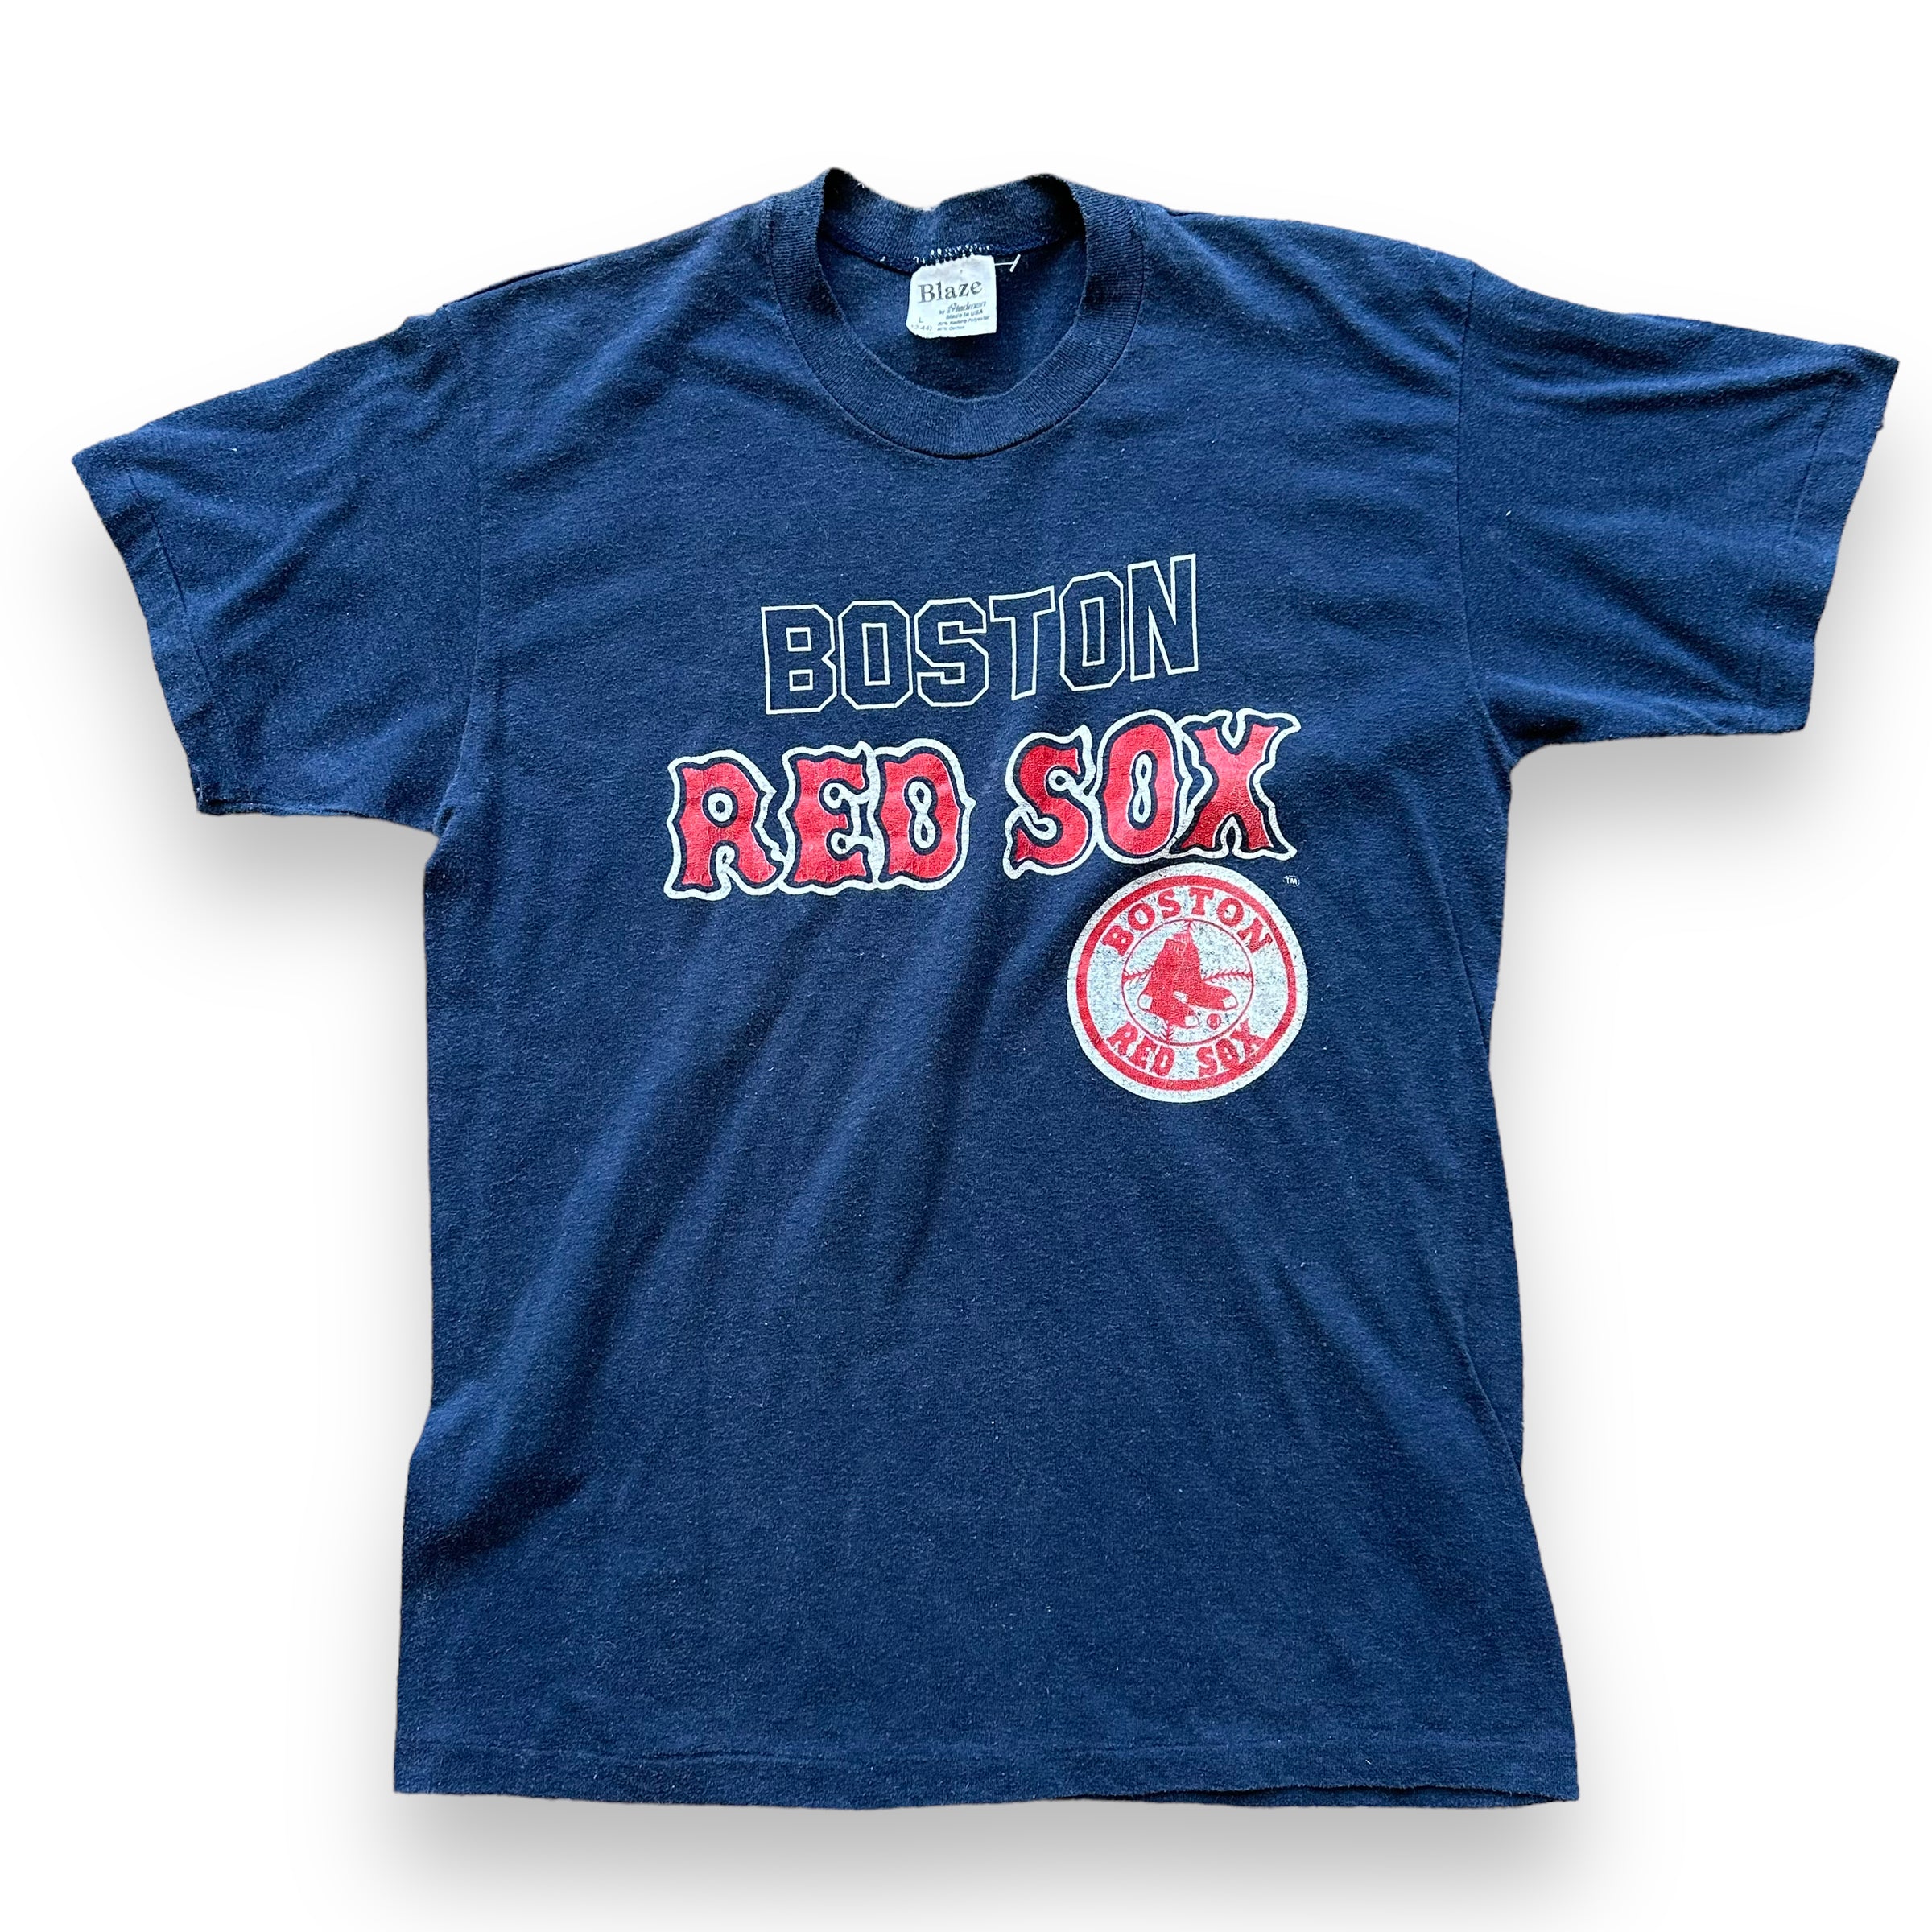 Vintage 80's Boston Red Sox Spring Training Red T Shirt 